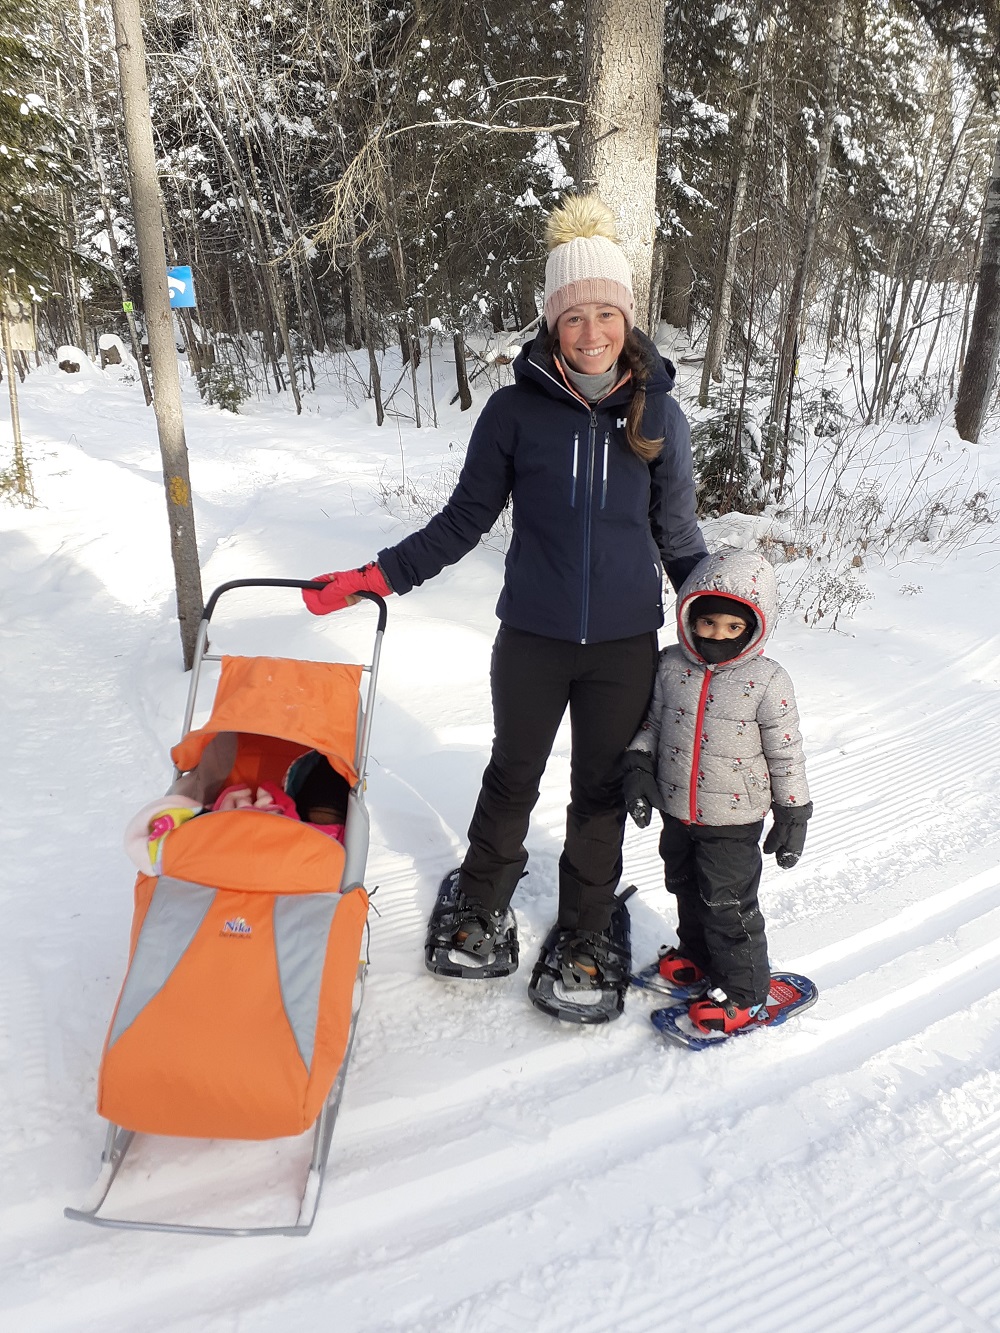 Major Catherine Cabot is the mother to two amazing human beings, Annabel (5) and Tristan (2). “Everything I strive to accomplish is not only for myself but to show my kids that women are strong.”